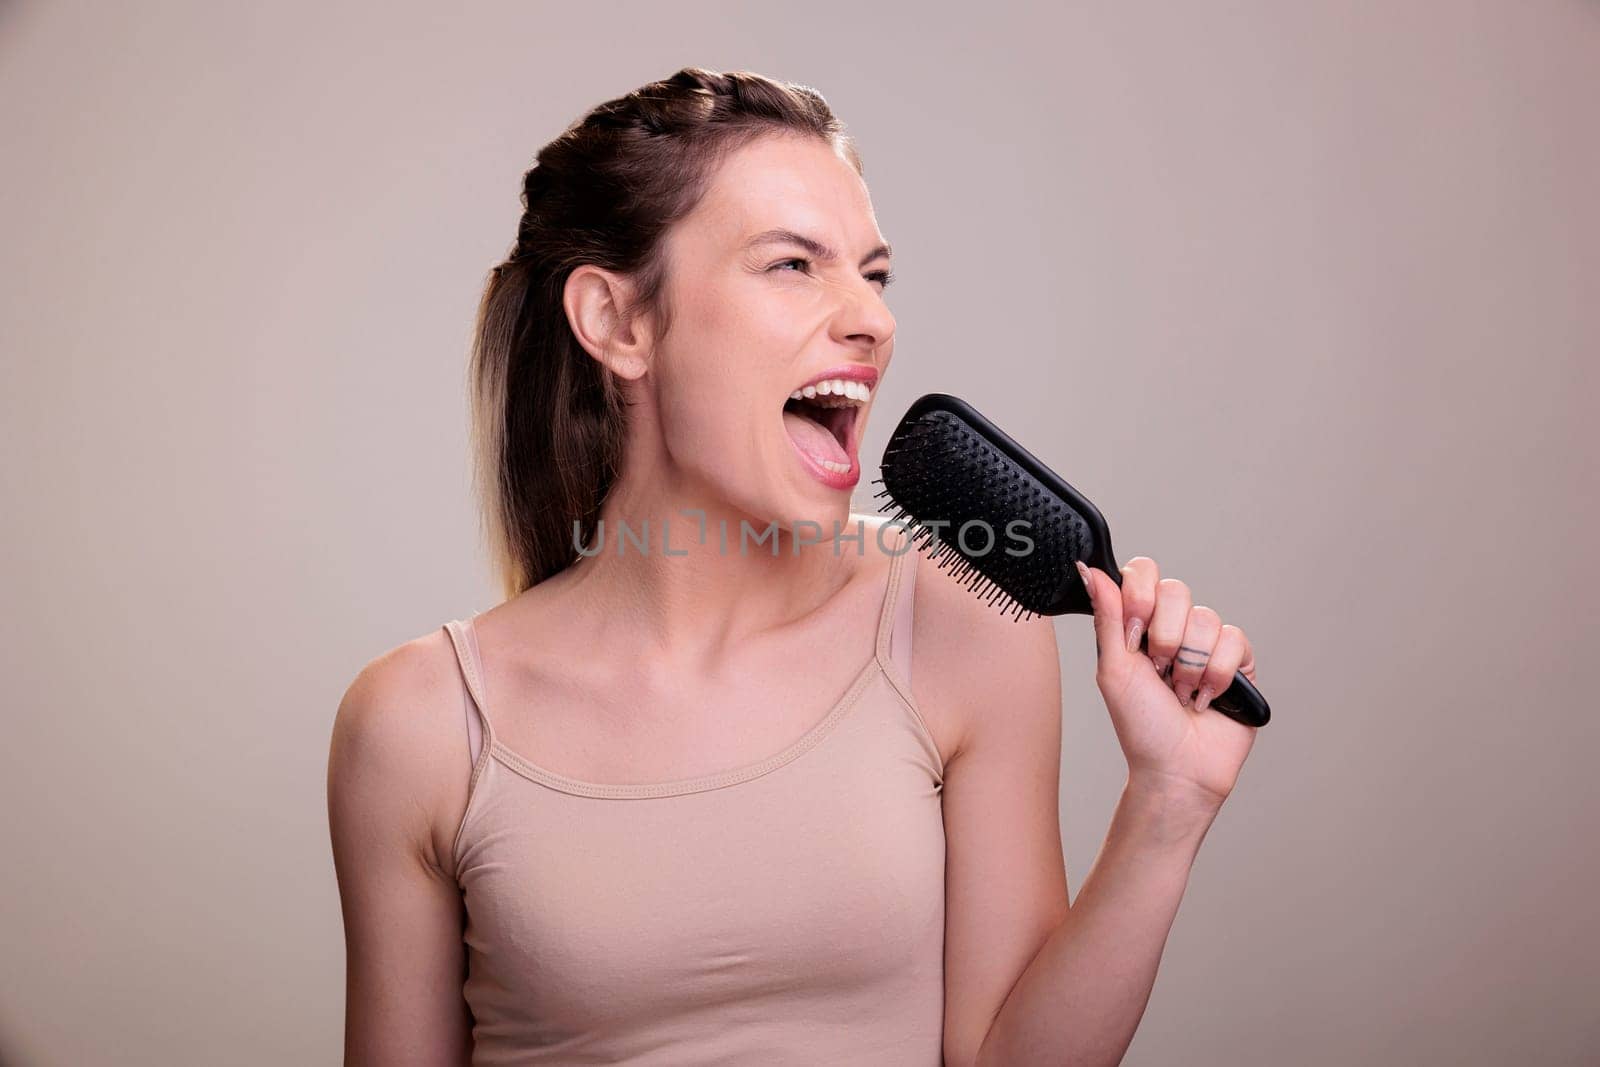 Beautiful woman singing loudly in hairbrush during hairstyle routine. Attractive young caucasian model posing with comb, using hairdressing tool as microphone and having fun